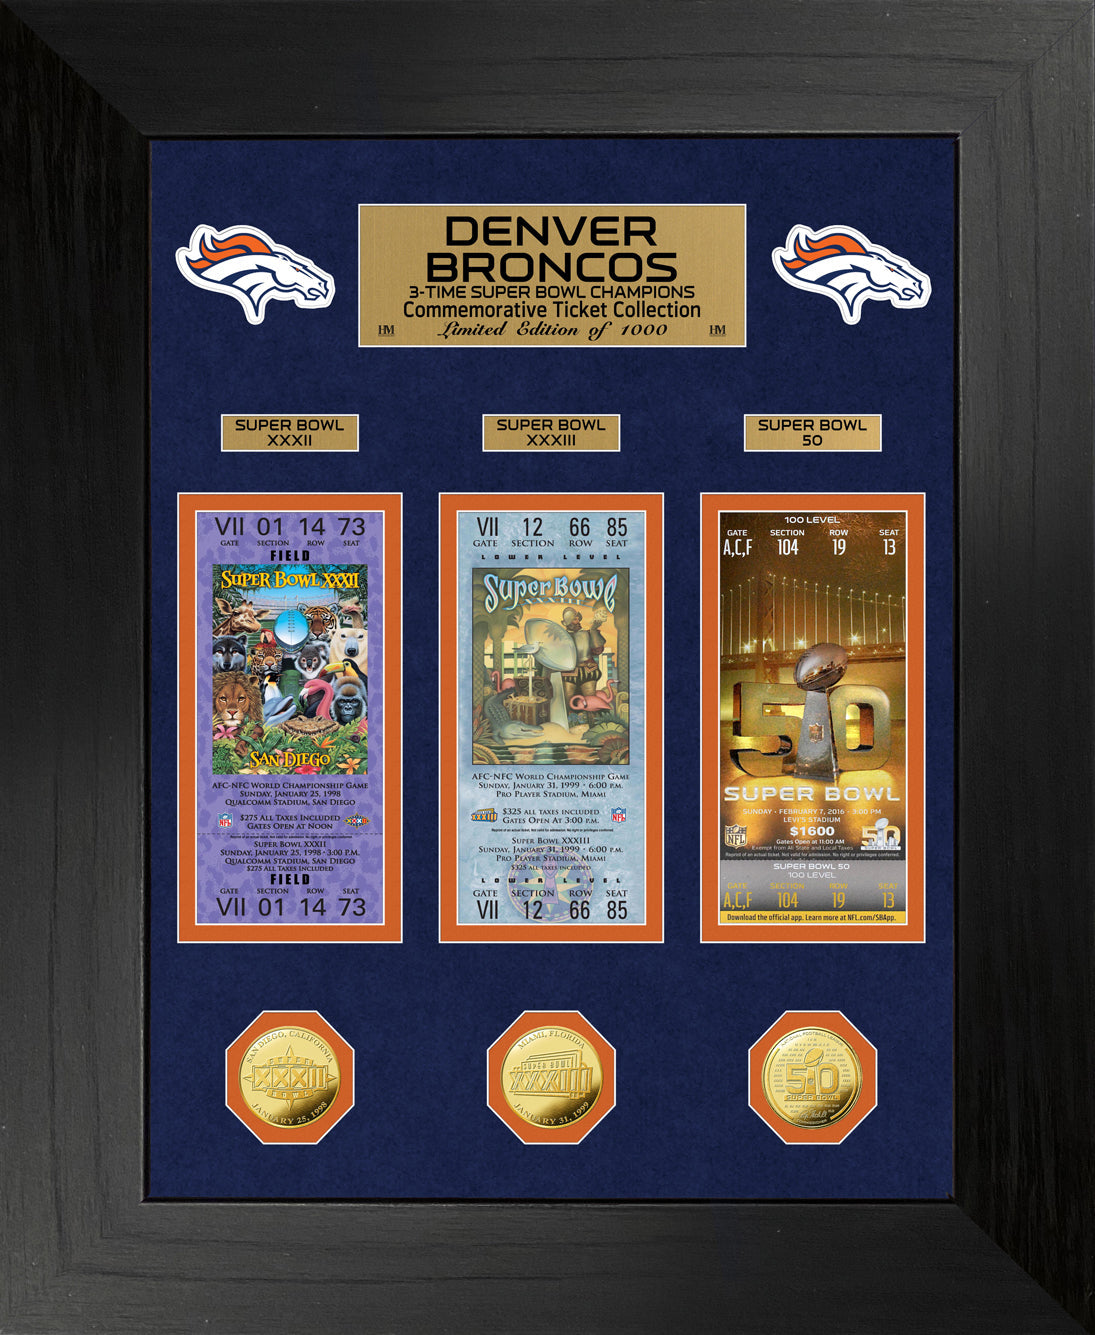 Denver Broncos 3-Time Super Bowl Champions Deluxe Gold Coin & Ticket Collection